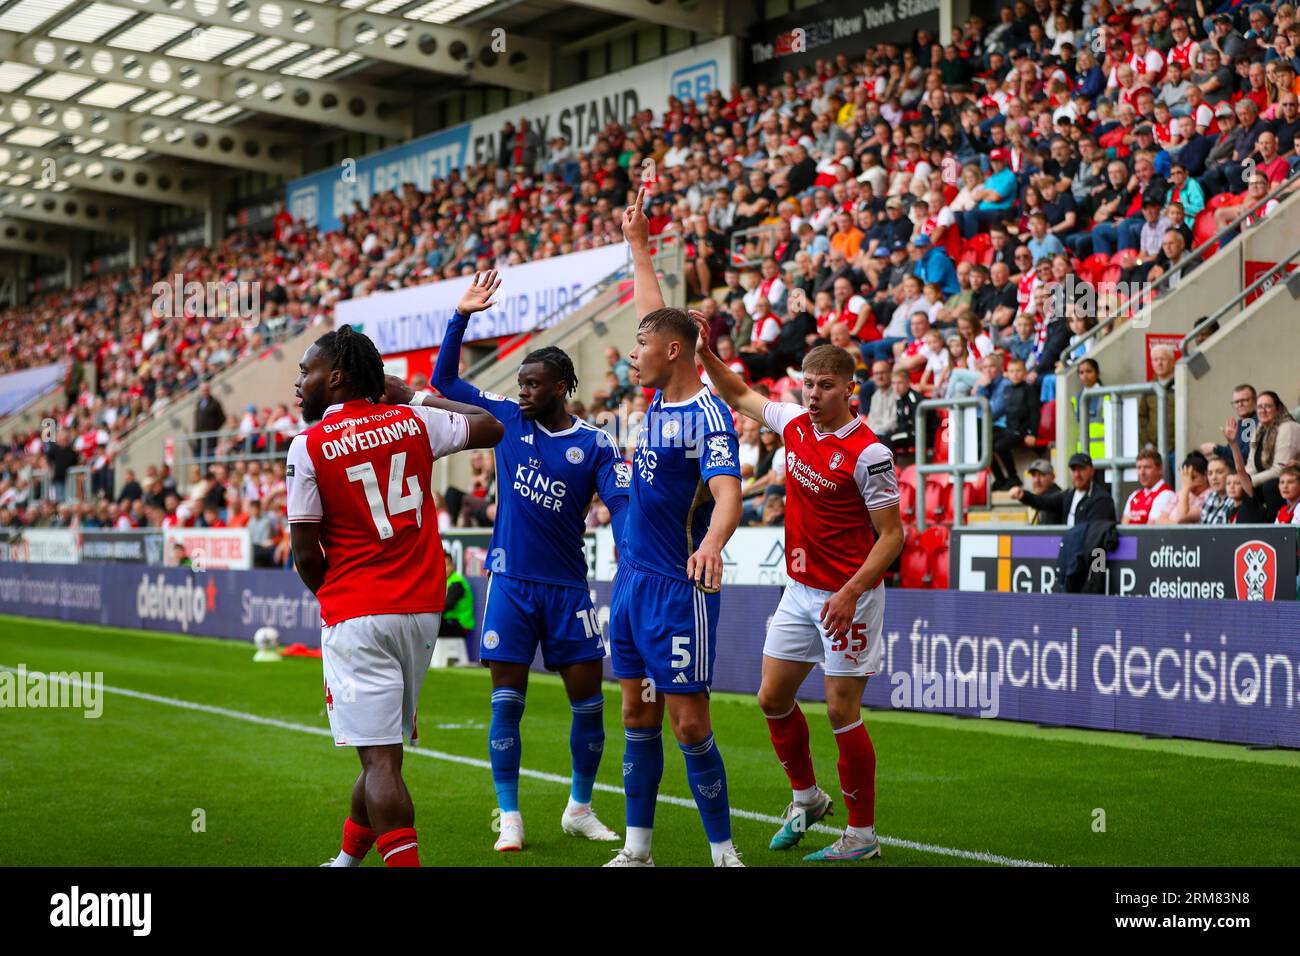 AESSEAL New York Stadium, Rotherham, England - 26th August 2023 Callum Doyle (5) of Leicester City and Stephy Mavididi (10) of Leicester City  and Fred Onyedinma (14) of Rotherham United and Ciaran McGuckin (35) of Rotherham United appeal for decision - during the game Rotherham United v Leicester City, Sky Bet Championship,  2023/24, AESSEAL New York Stadium, Rotherham, England - 26th August 2023 Credit: Mathew Marsden/WhiteRosePhotos/Alamy Live News Stock Photo